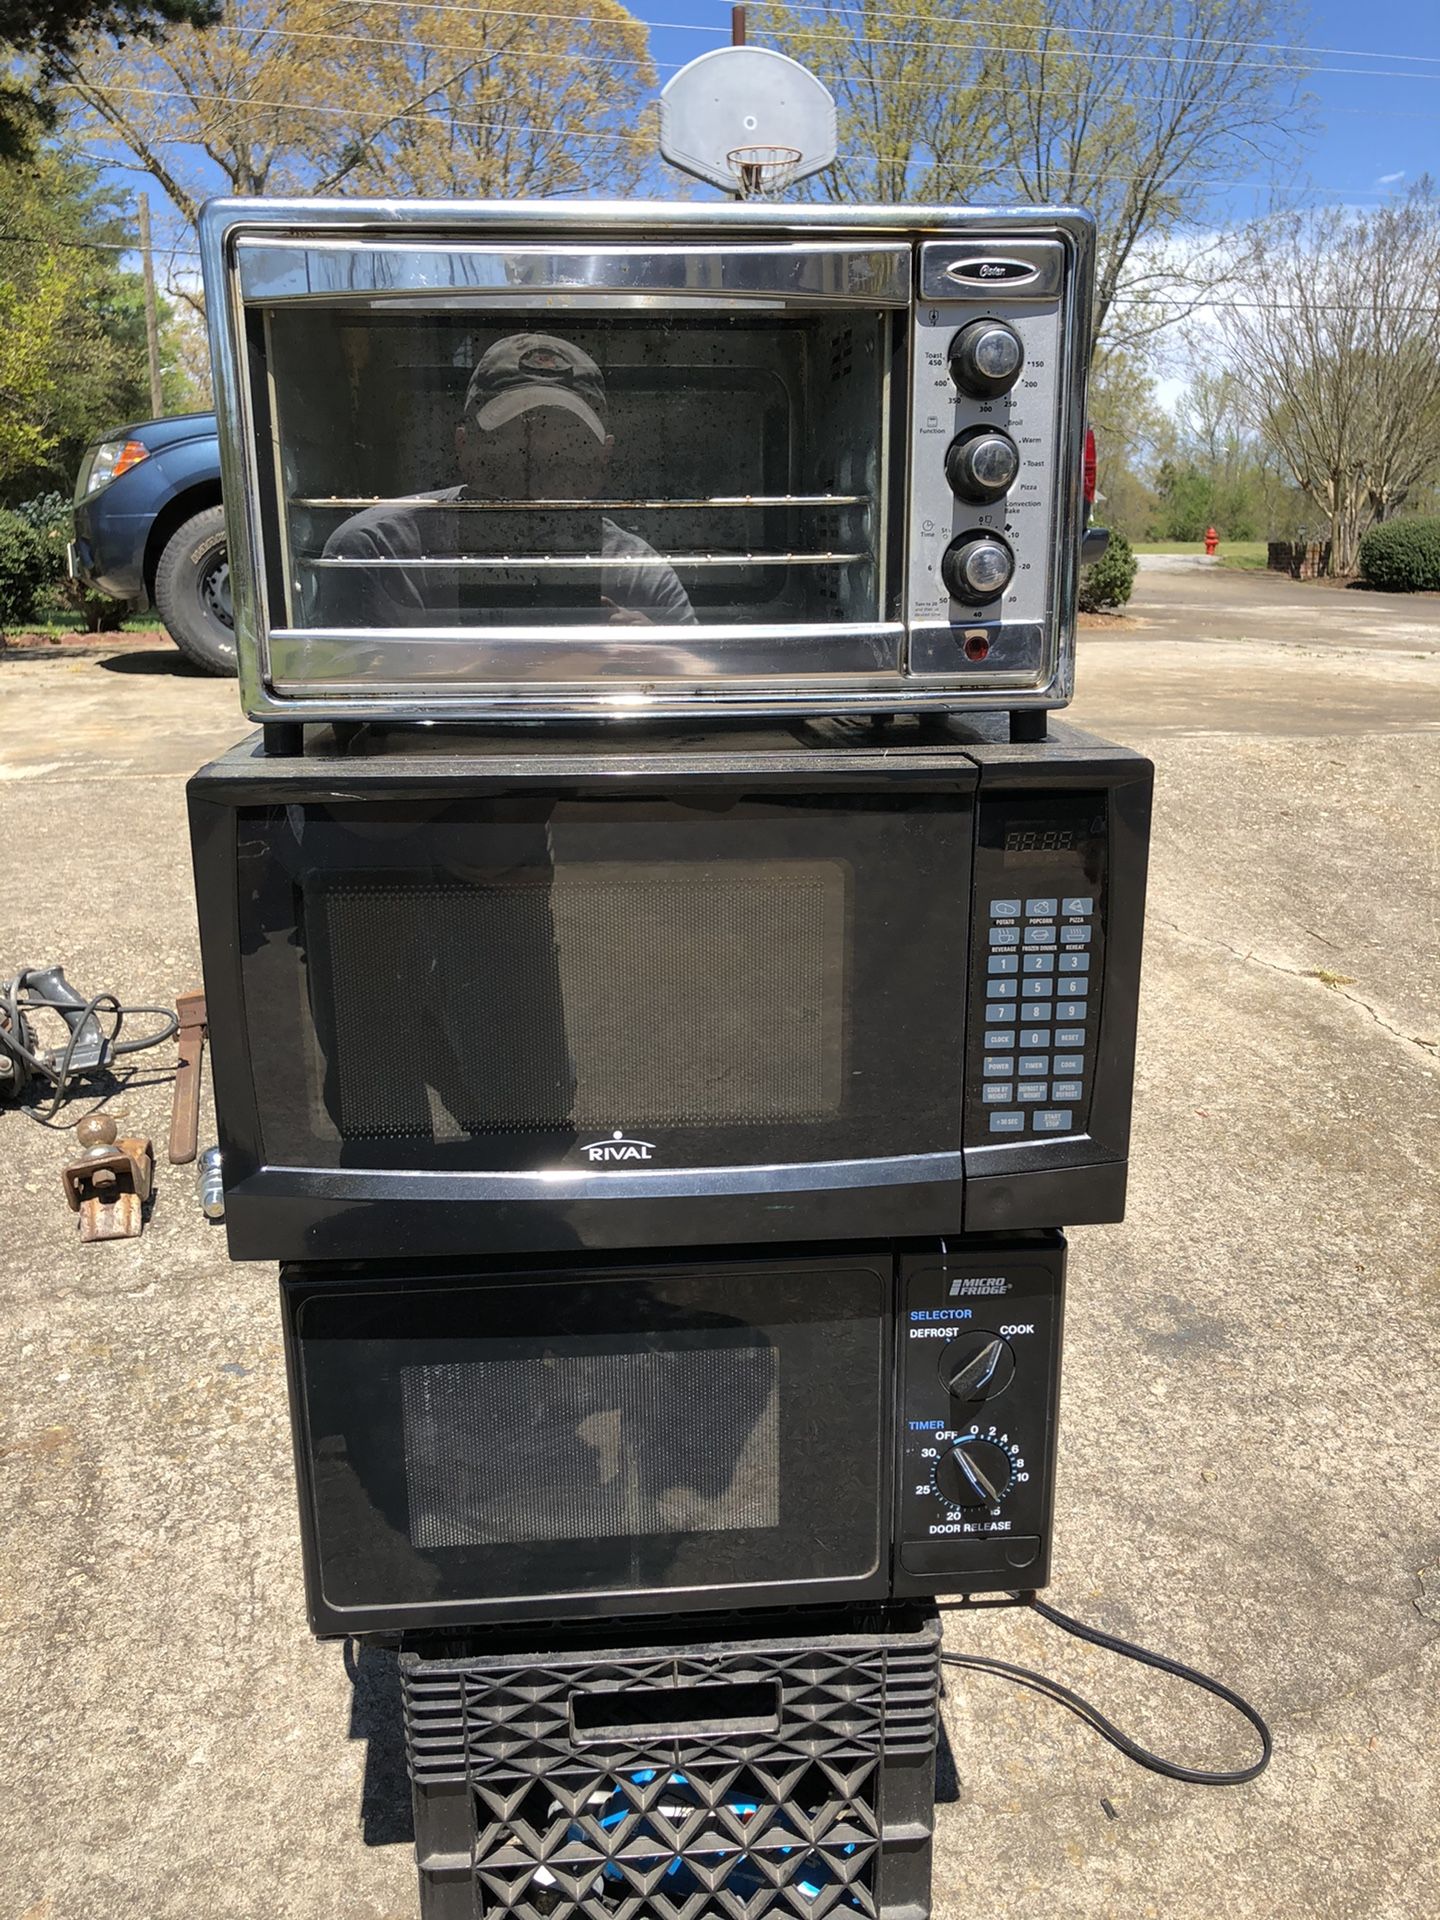 Oster oven Regal microwaves